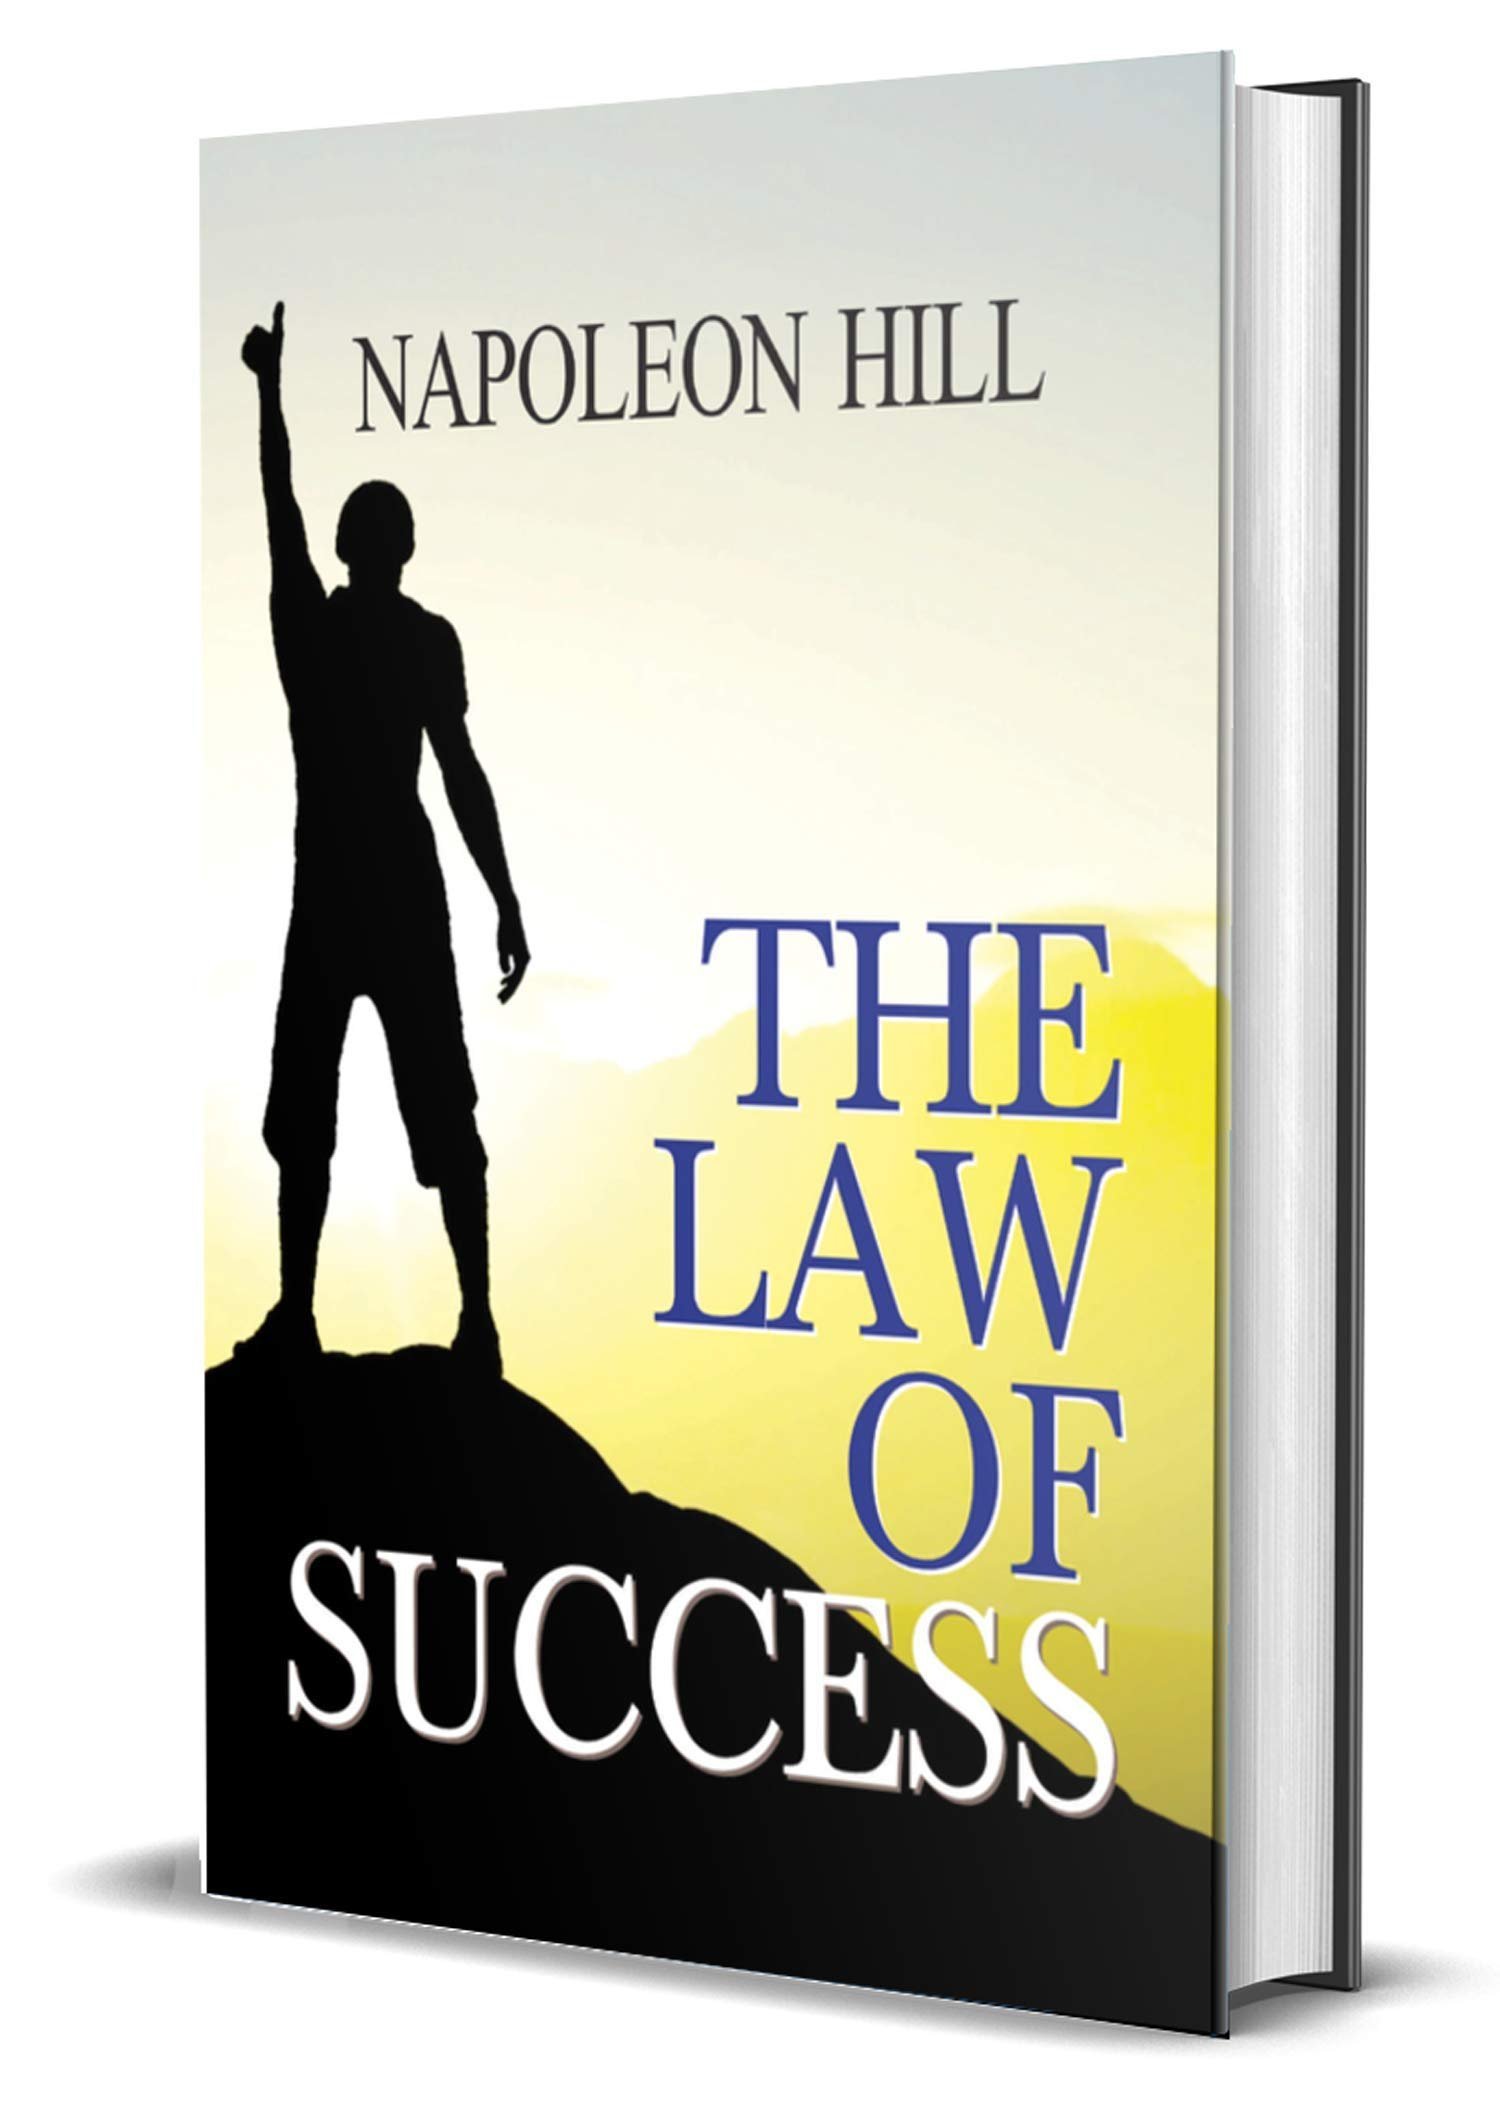 THE 21 GREATEST LAWS OF SUCCESS IN LIFE